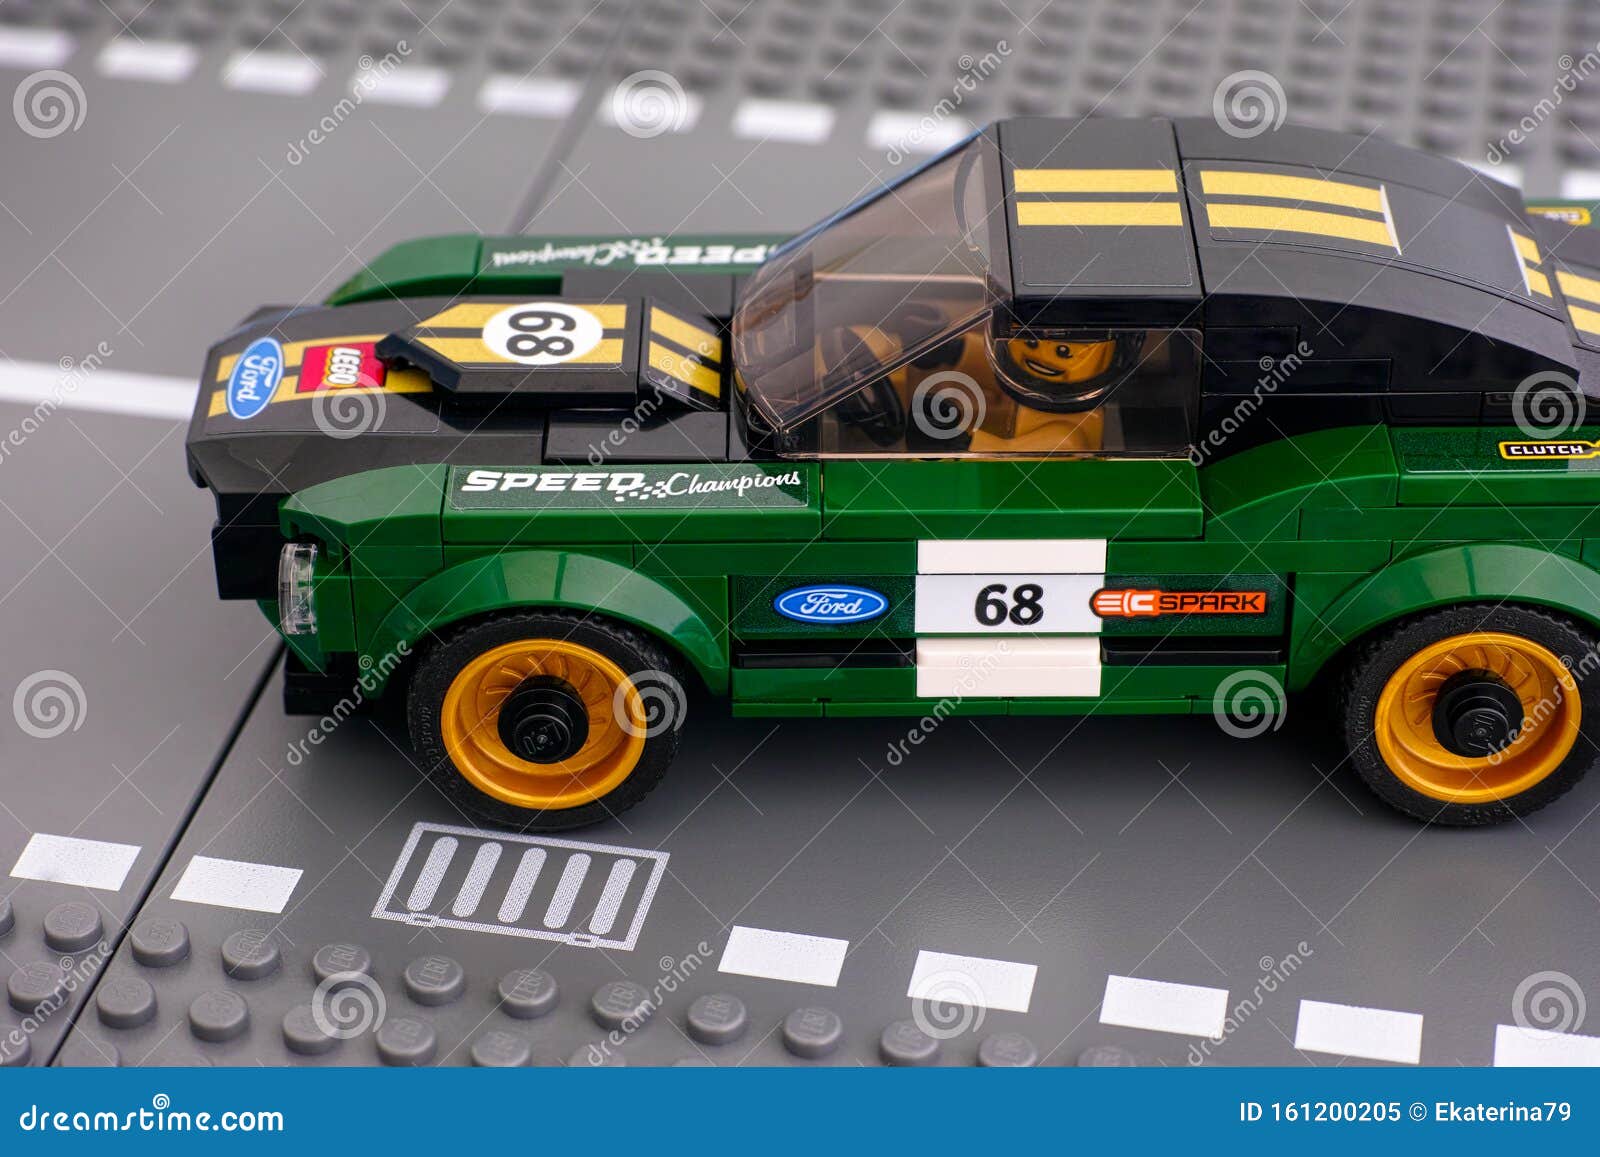 Lego 1968 Ford Mustang Fastback Car by LEGO Speed Champions with Driver on  Lego Road Baseplates Editorial Image - Image of mustang, minifigure:  161200205